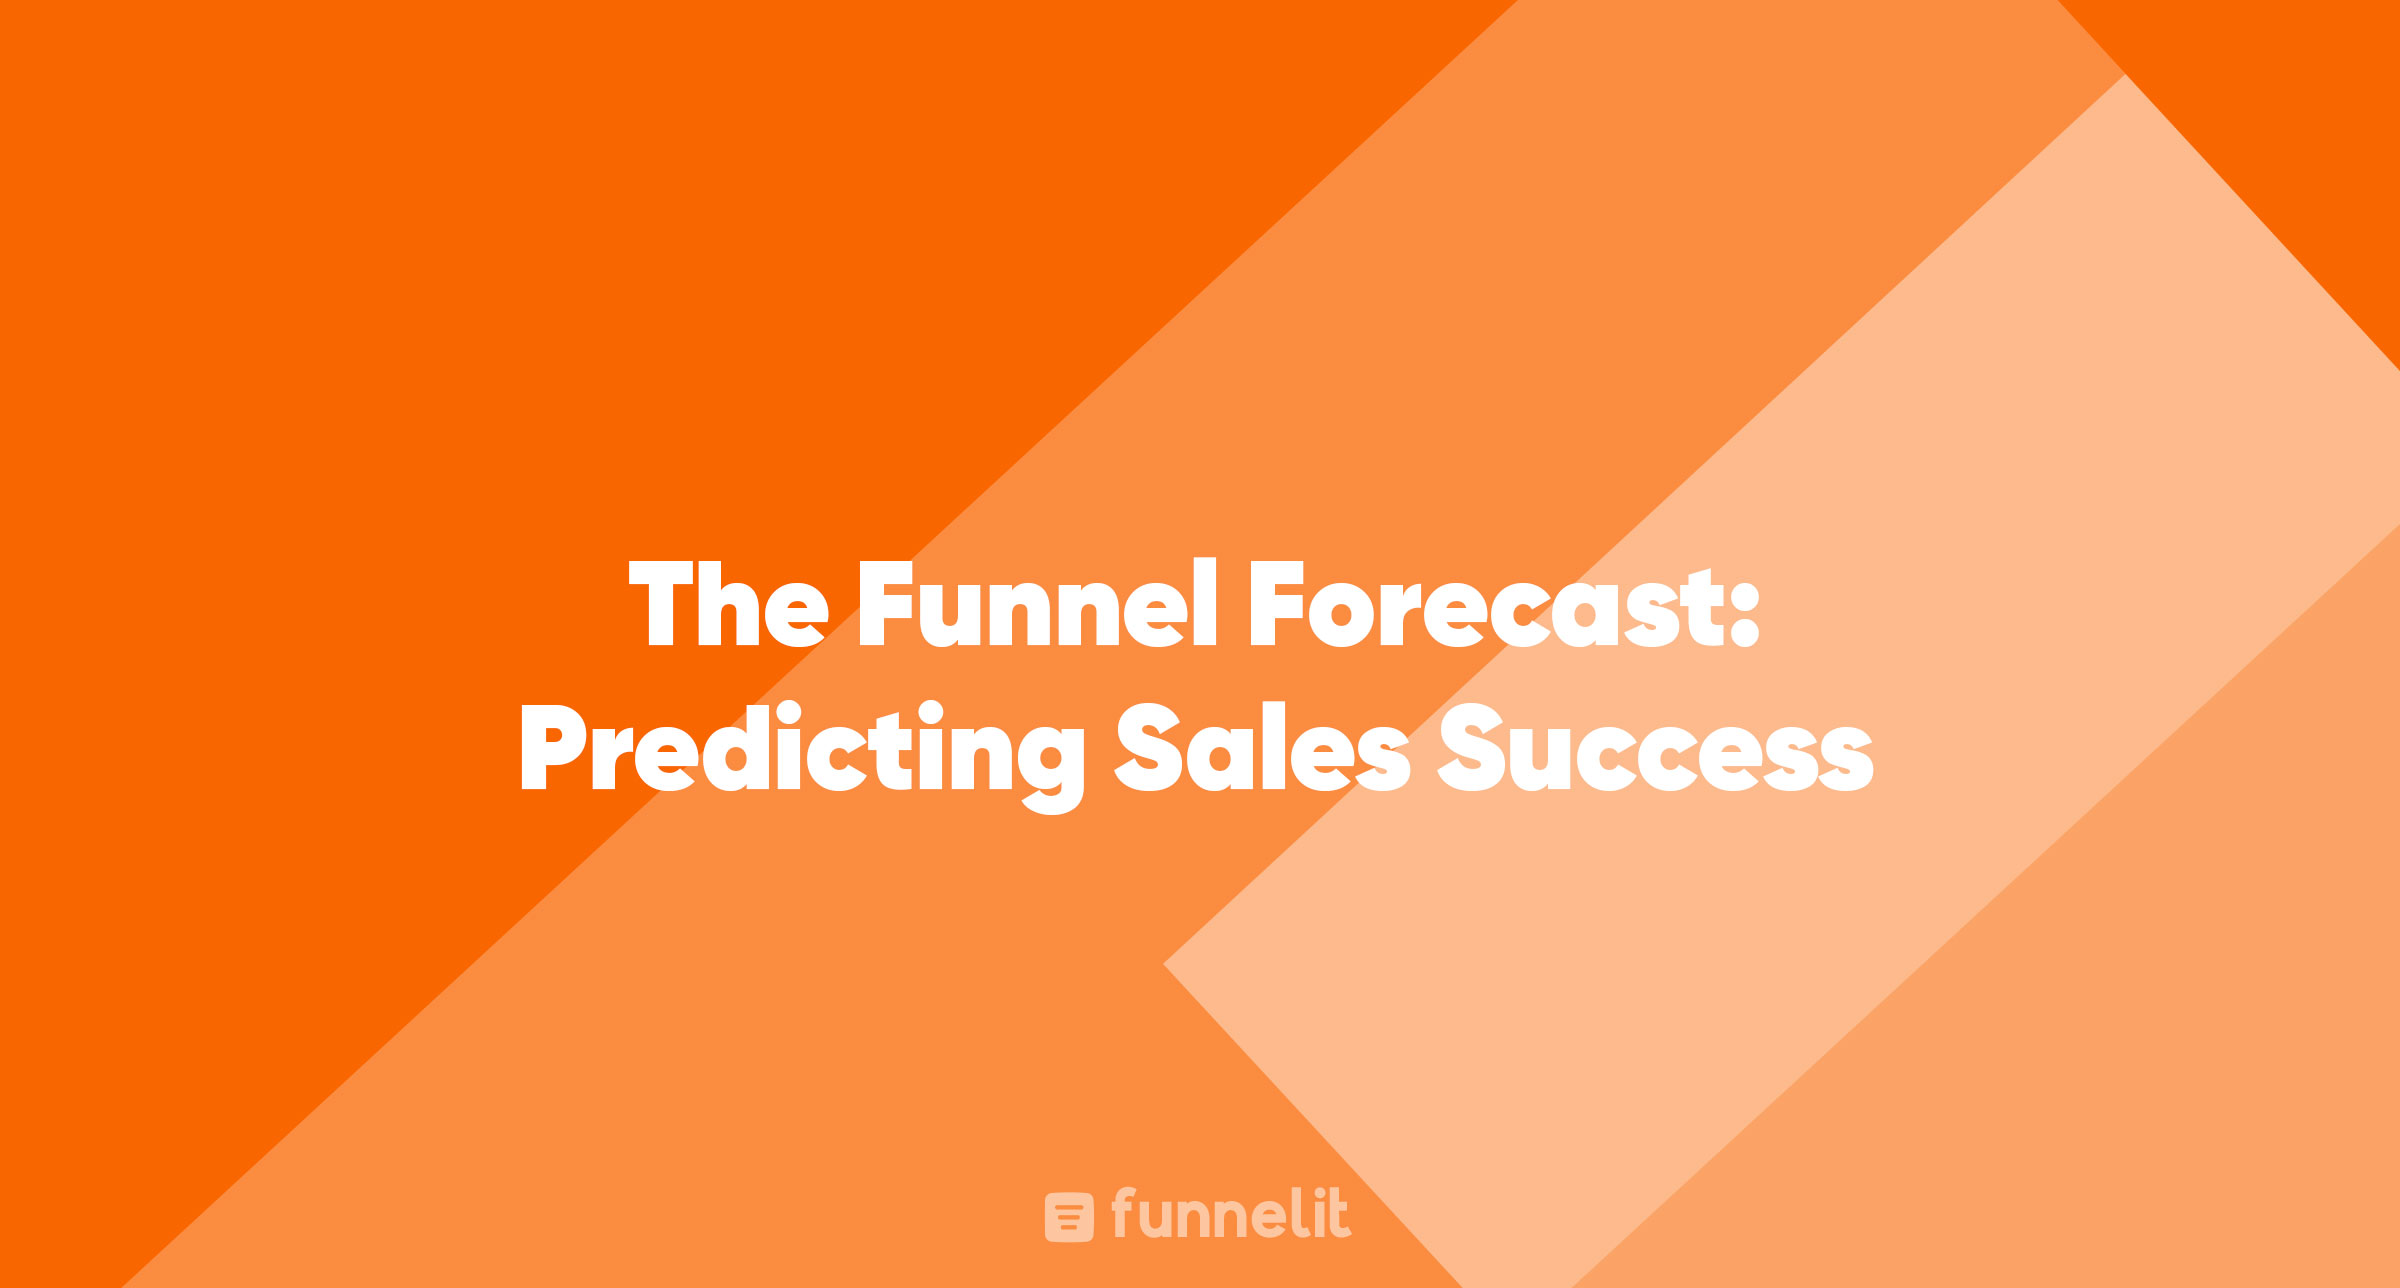 Article | The Funnel Forecast: Predicting Sales Success